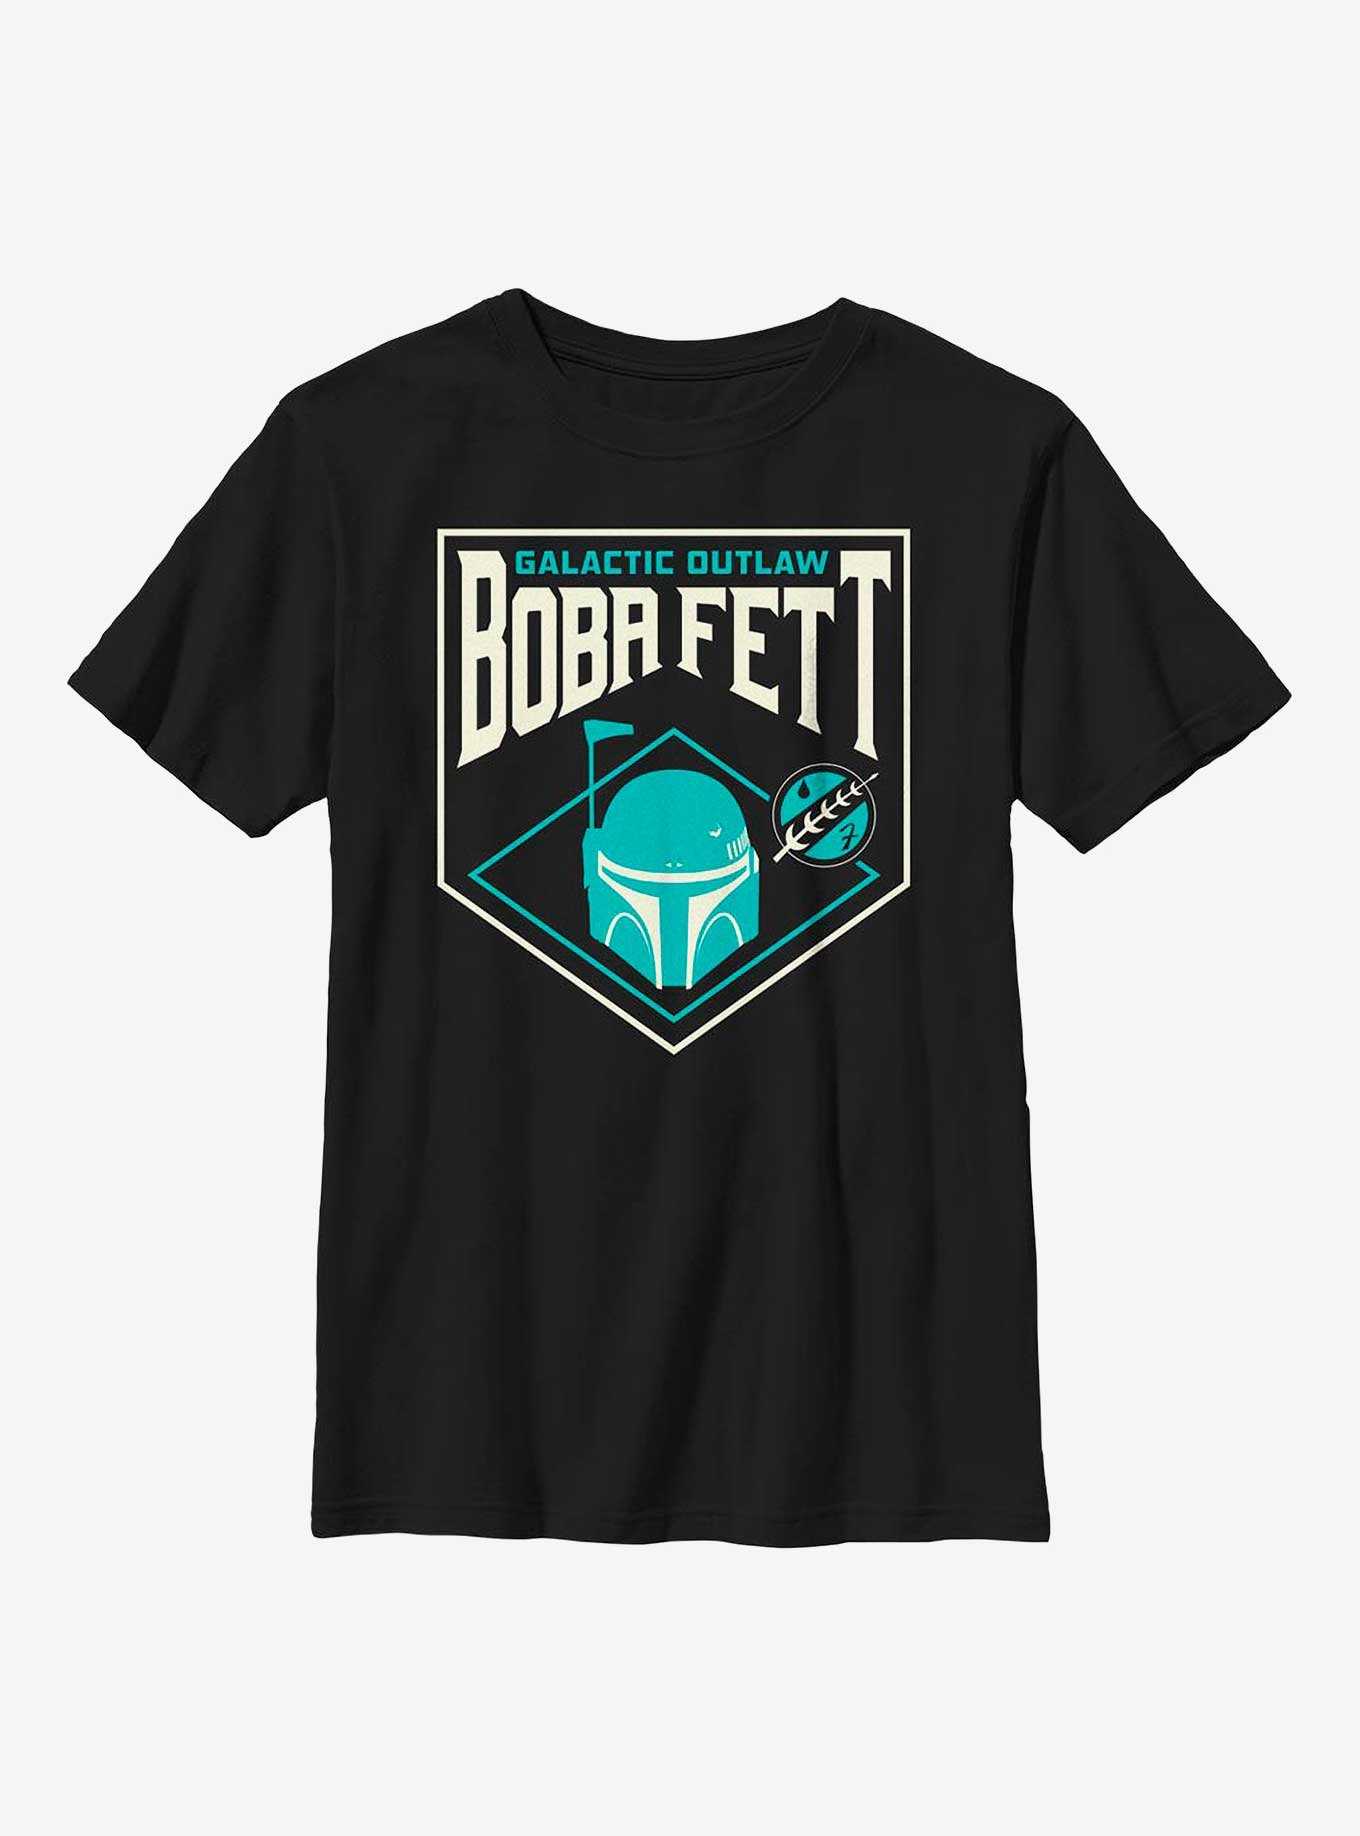 Star Wars: The Book Of Boba Fett Galactic Outlaw Badge Youth T-Shirt, , hi-res